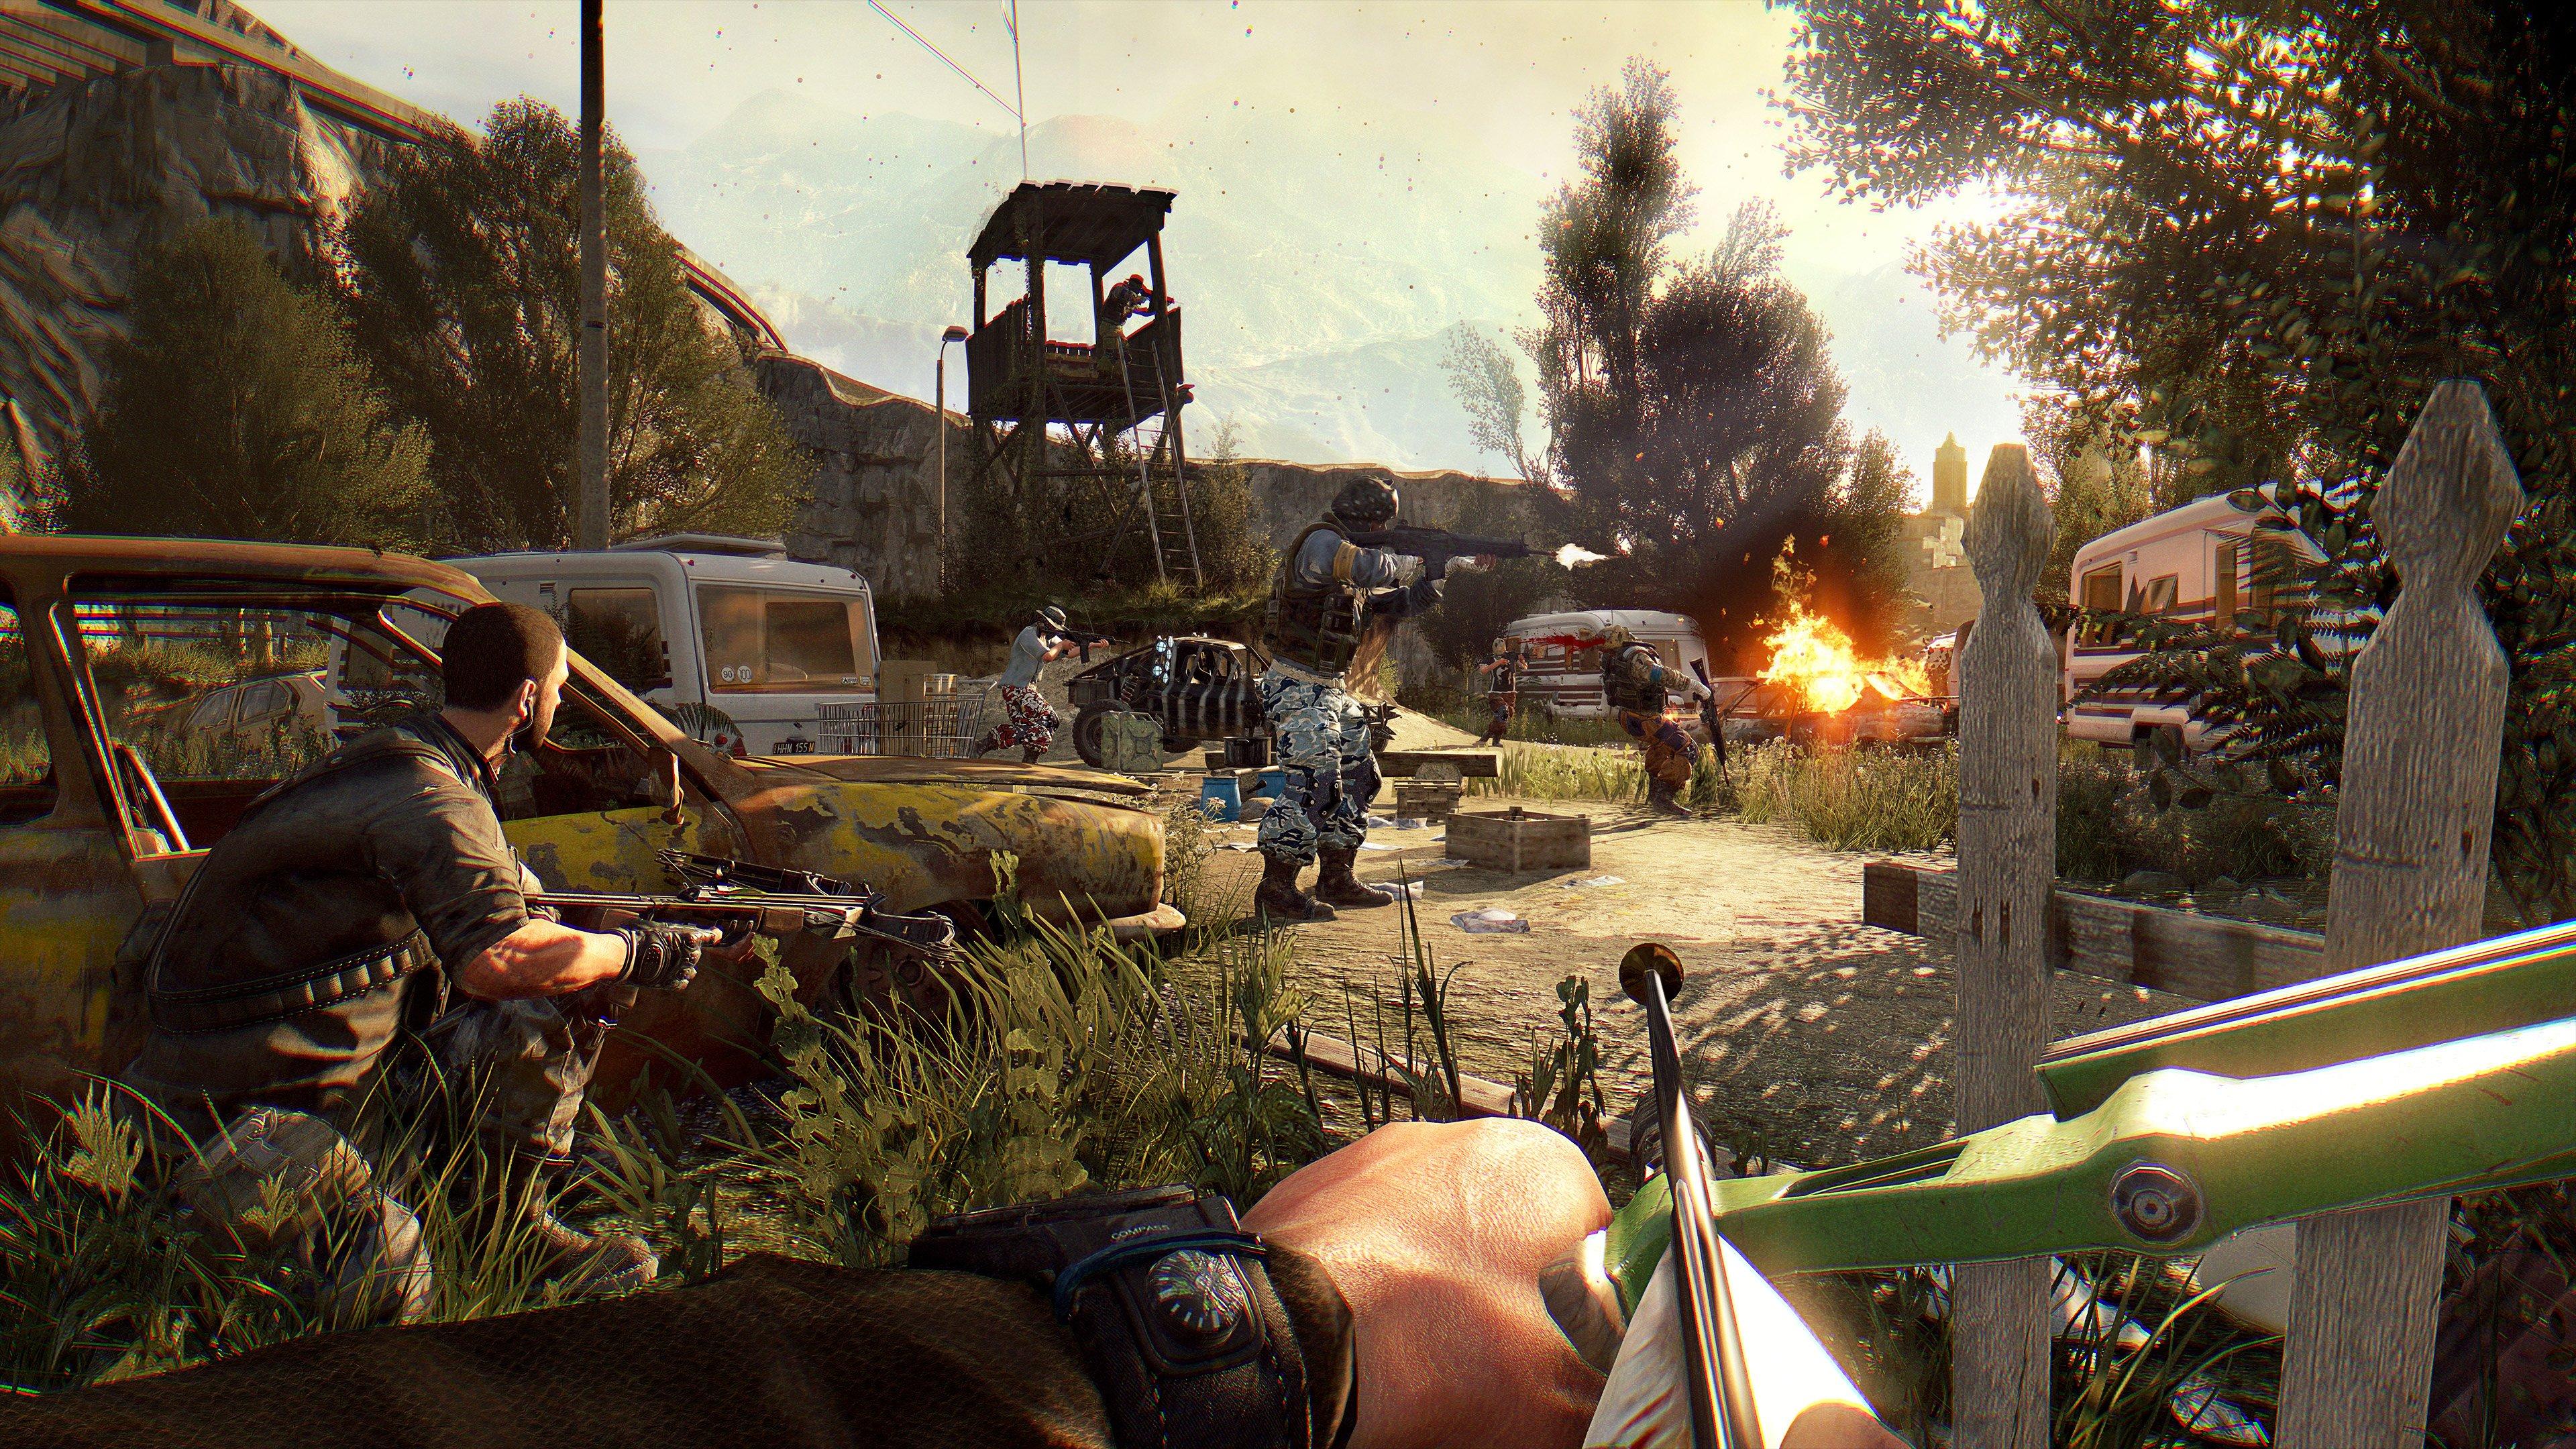 Dying Light: The Following Enhanced Edition - Xbox One, Xbox One